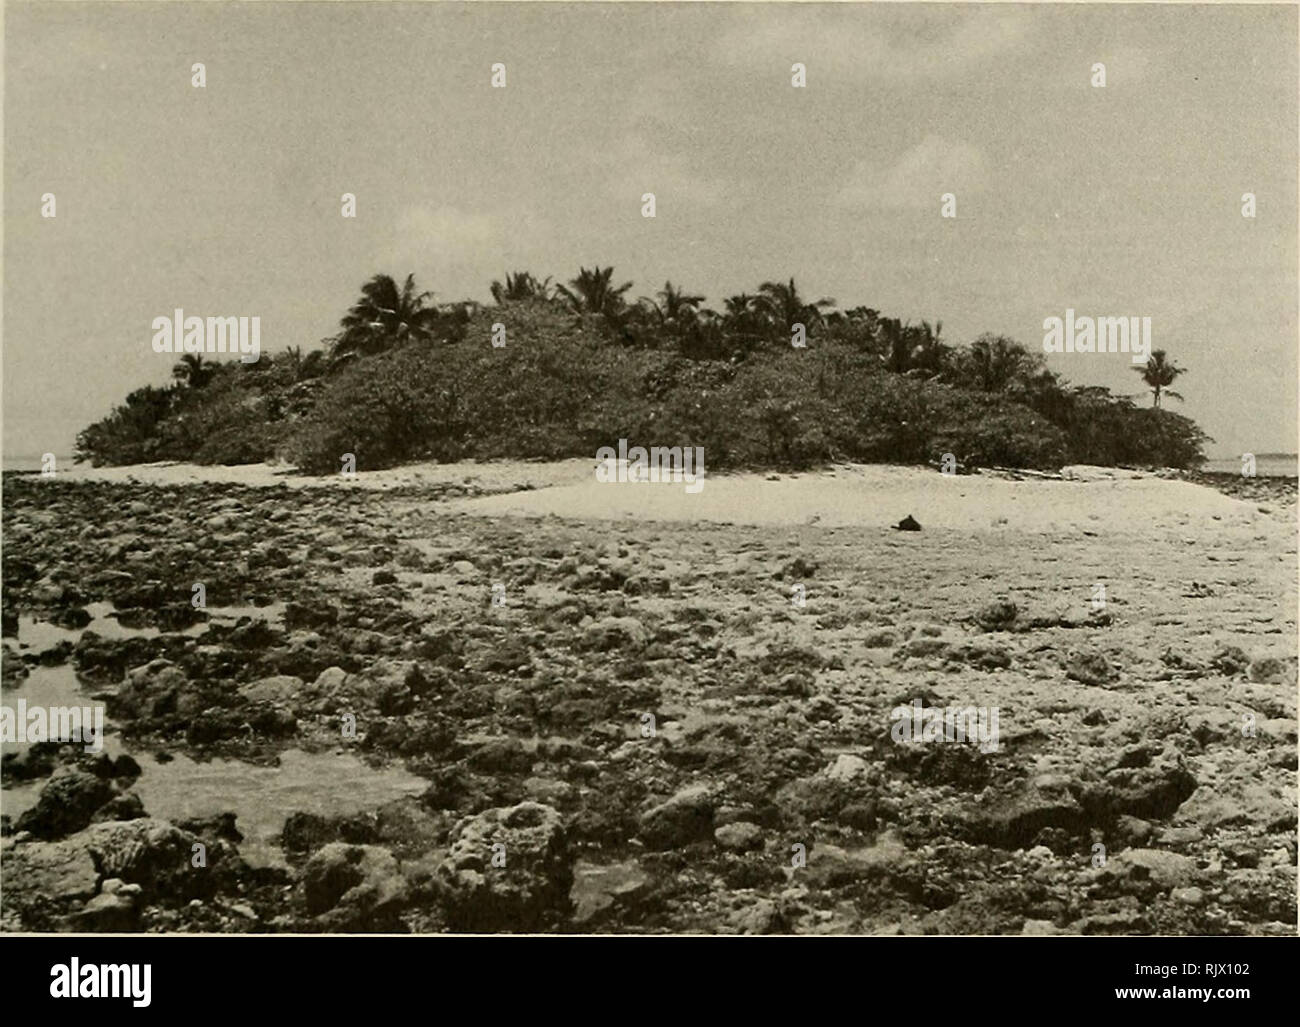 . Atoll research bulletin. Coral reefs and islands; Marine biology; Marine sciences. Plate i. Motu Tou 1, coconut woodland and mixed scrub types. The island has a shingle substrate and is surrounded by boulder tract (foreground). much of the islands but locally there is a ground cover of Portulaca johnii, Boerhavia tetrandra, Lepturus repens or Fimbristylis cymosa. Where coral shingle or sand has accumulated there is often a scrub of Tournefortia argentea (Plate 2). This species commonly forms inliers within Pemphis scrub. It forms more extensive stands over some sandy or shingle islands (such Stock Photo